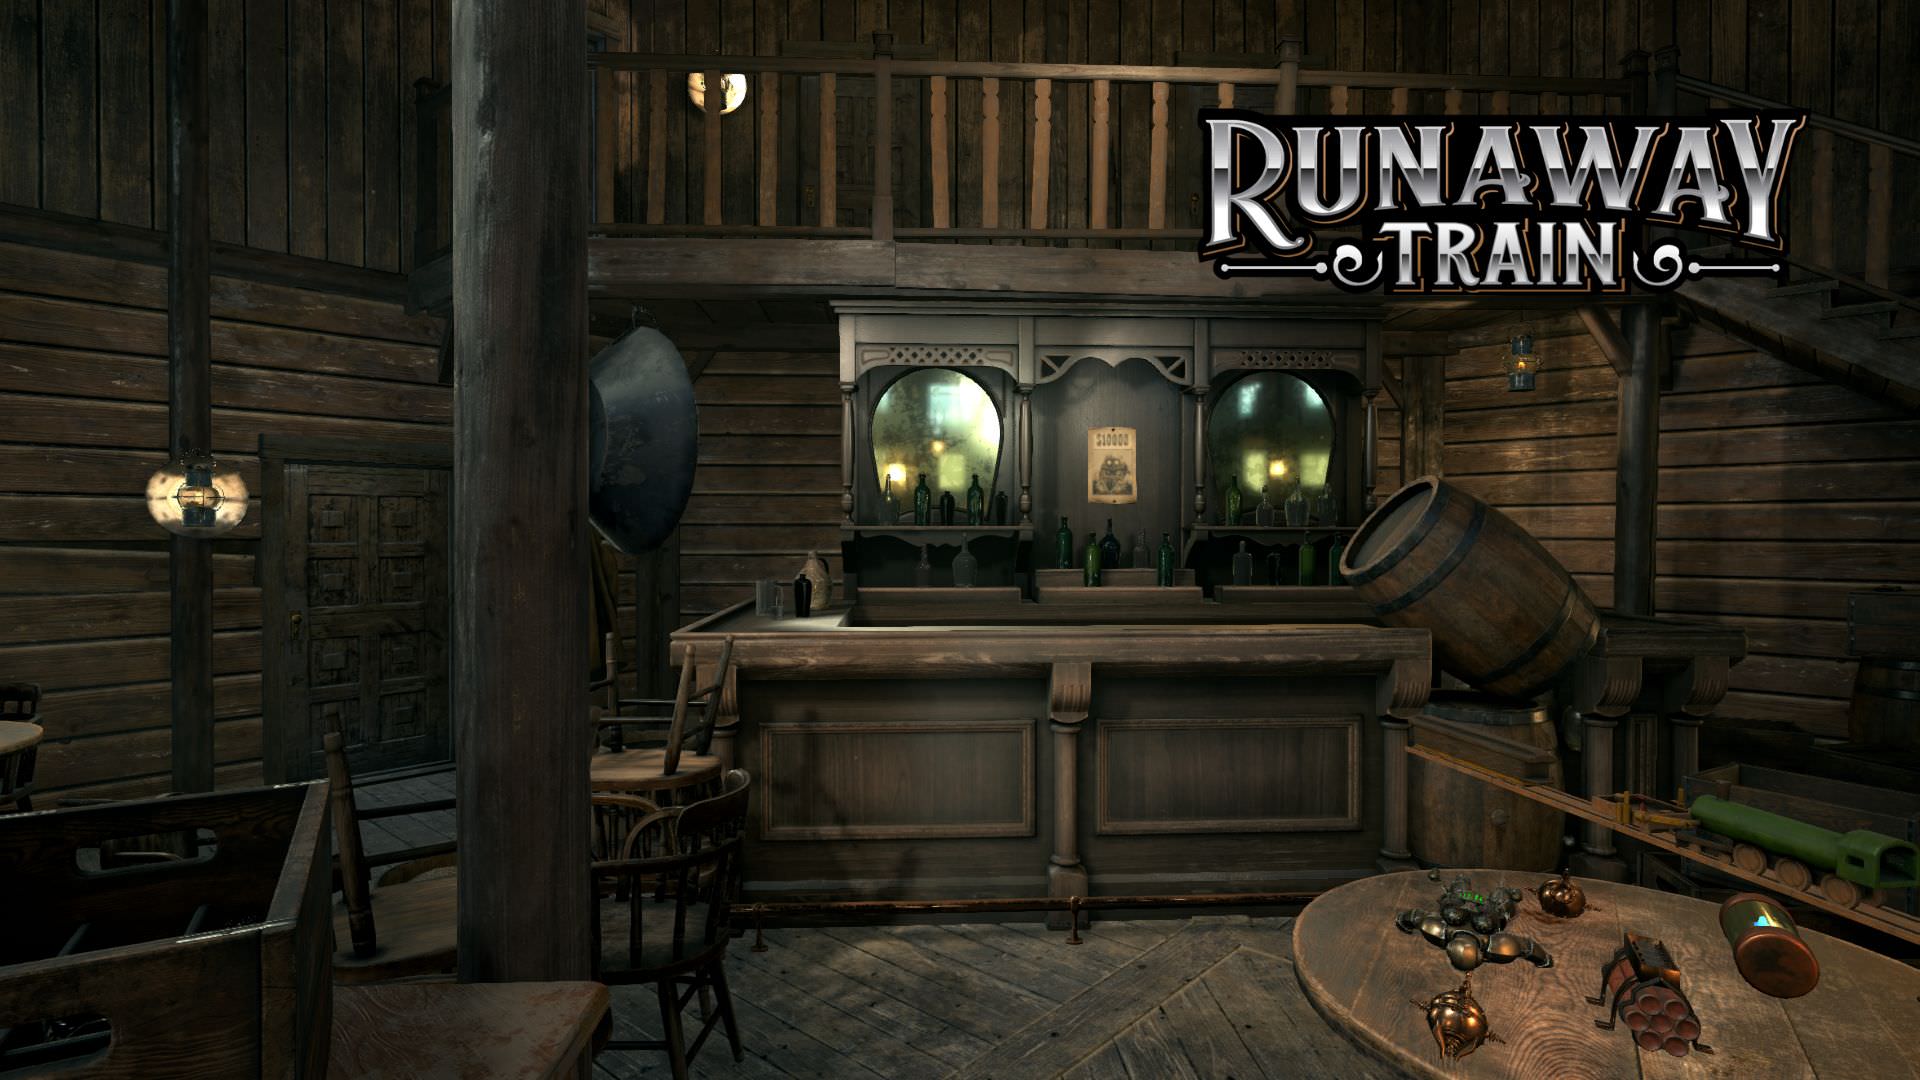 A virtual reality escape room in where players solve puzzles on a virtual runaway train.